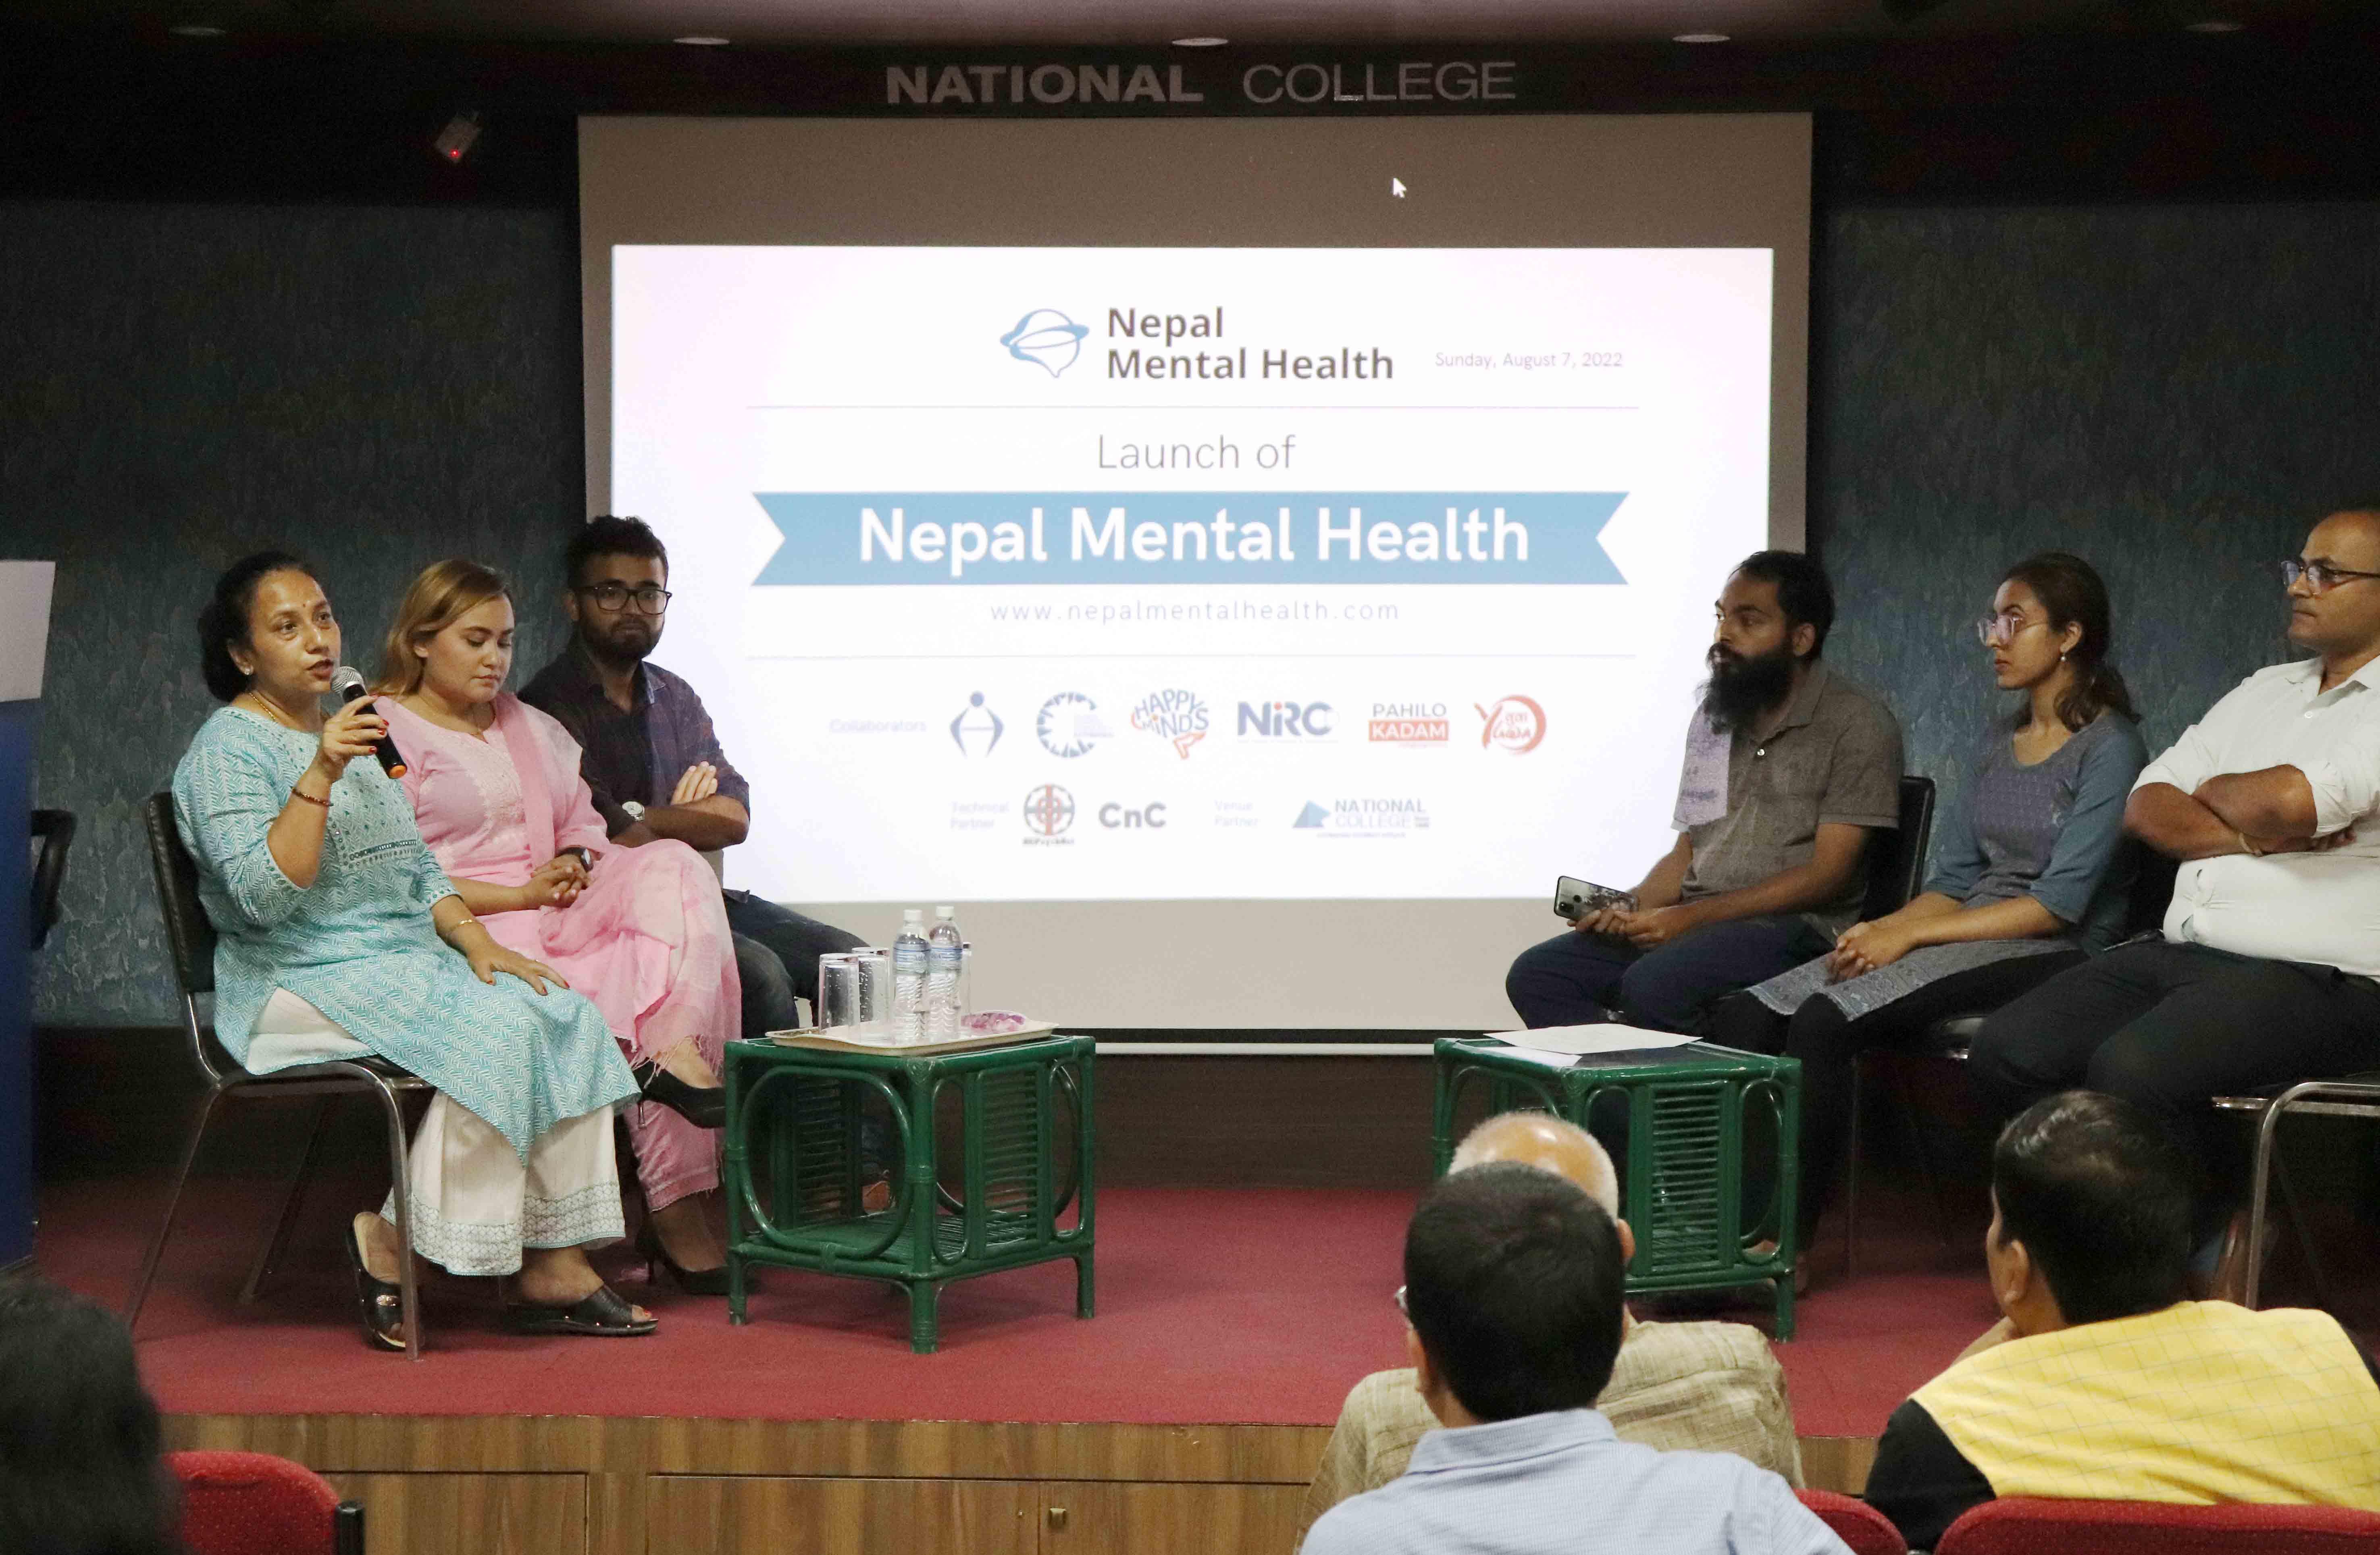 Nepal Mental Health Website Launched